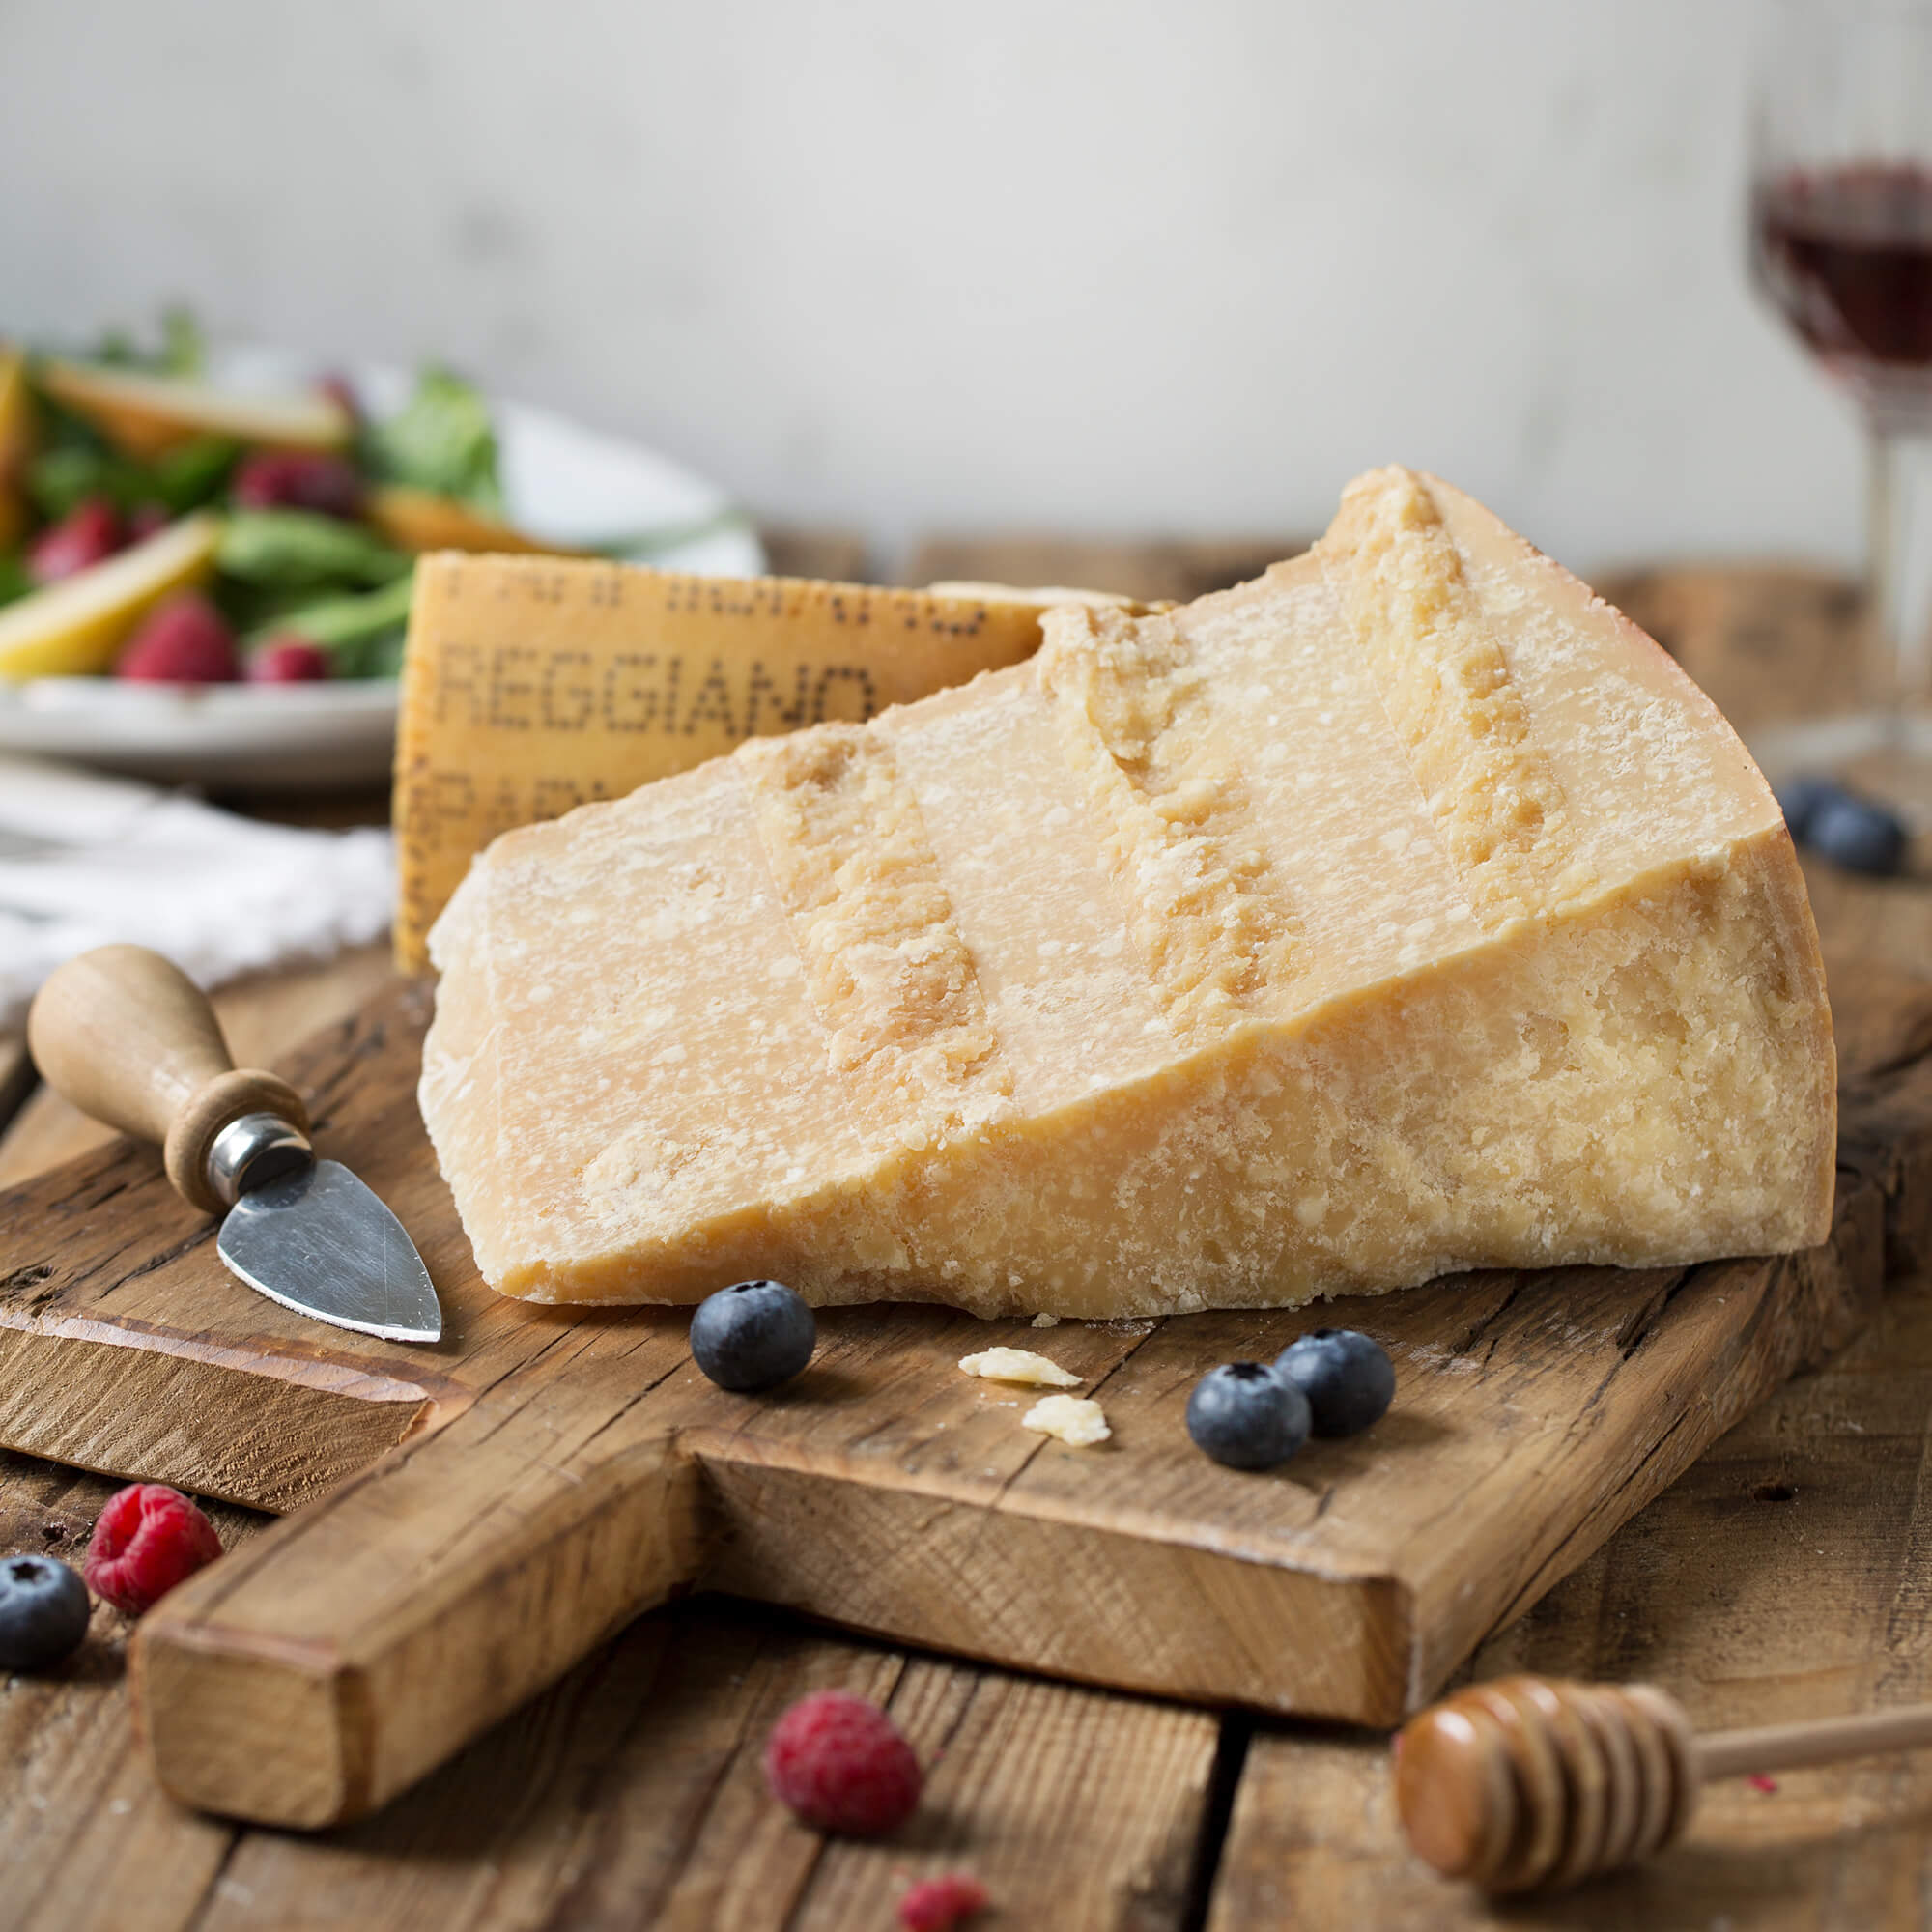 Parmigiano Reggiano DOP 36 months 2.2 lb (1kg) - The Only Parmesan - EMILIA  FOOD LOVE Selected with love in Italy